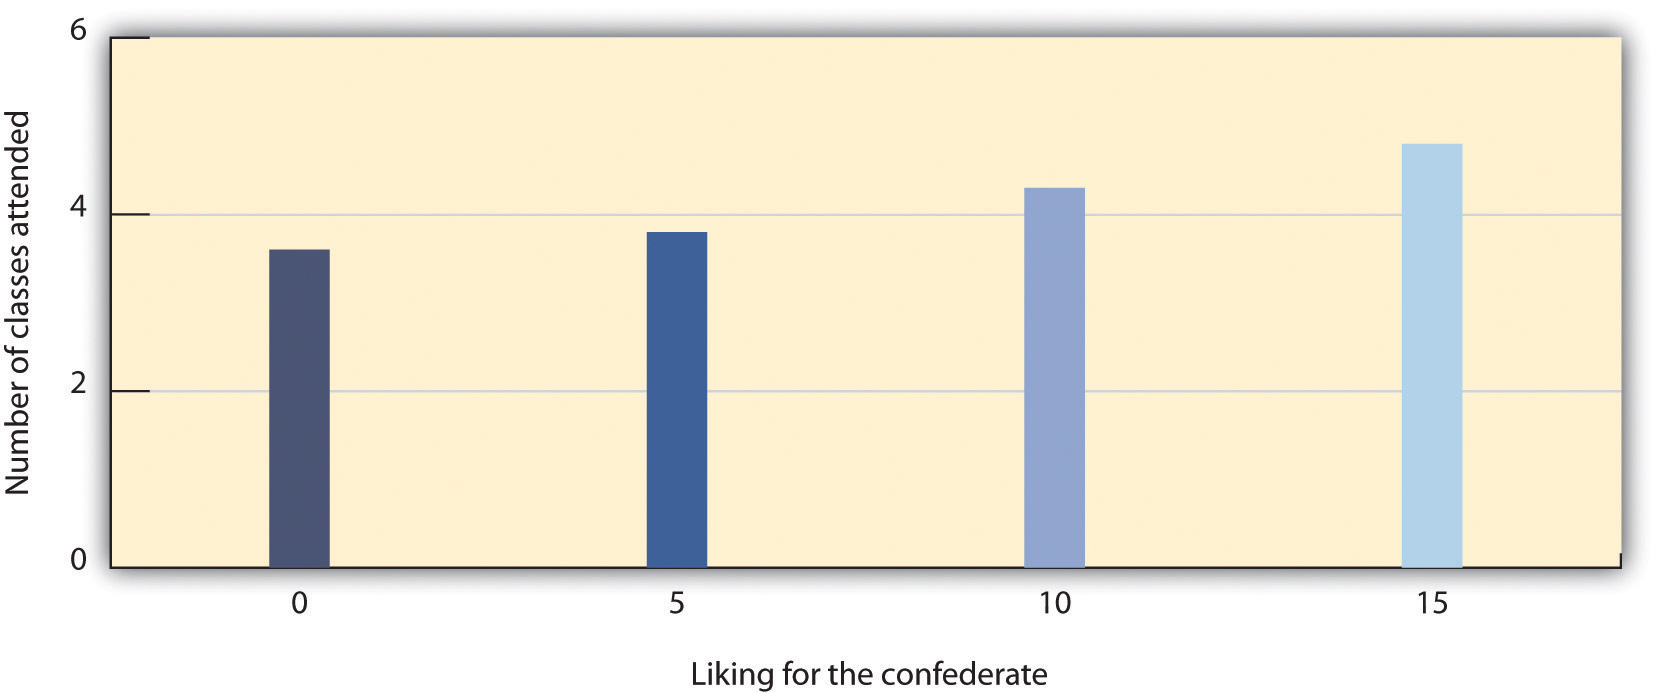 This chart shows the number of classes attended contrasted by liking for the confederate.